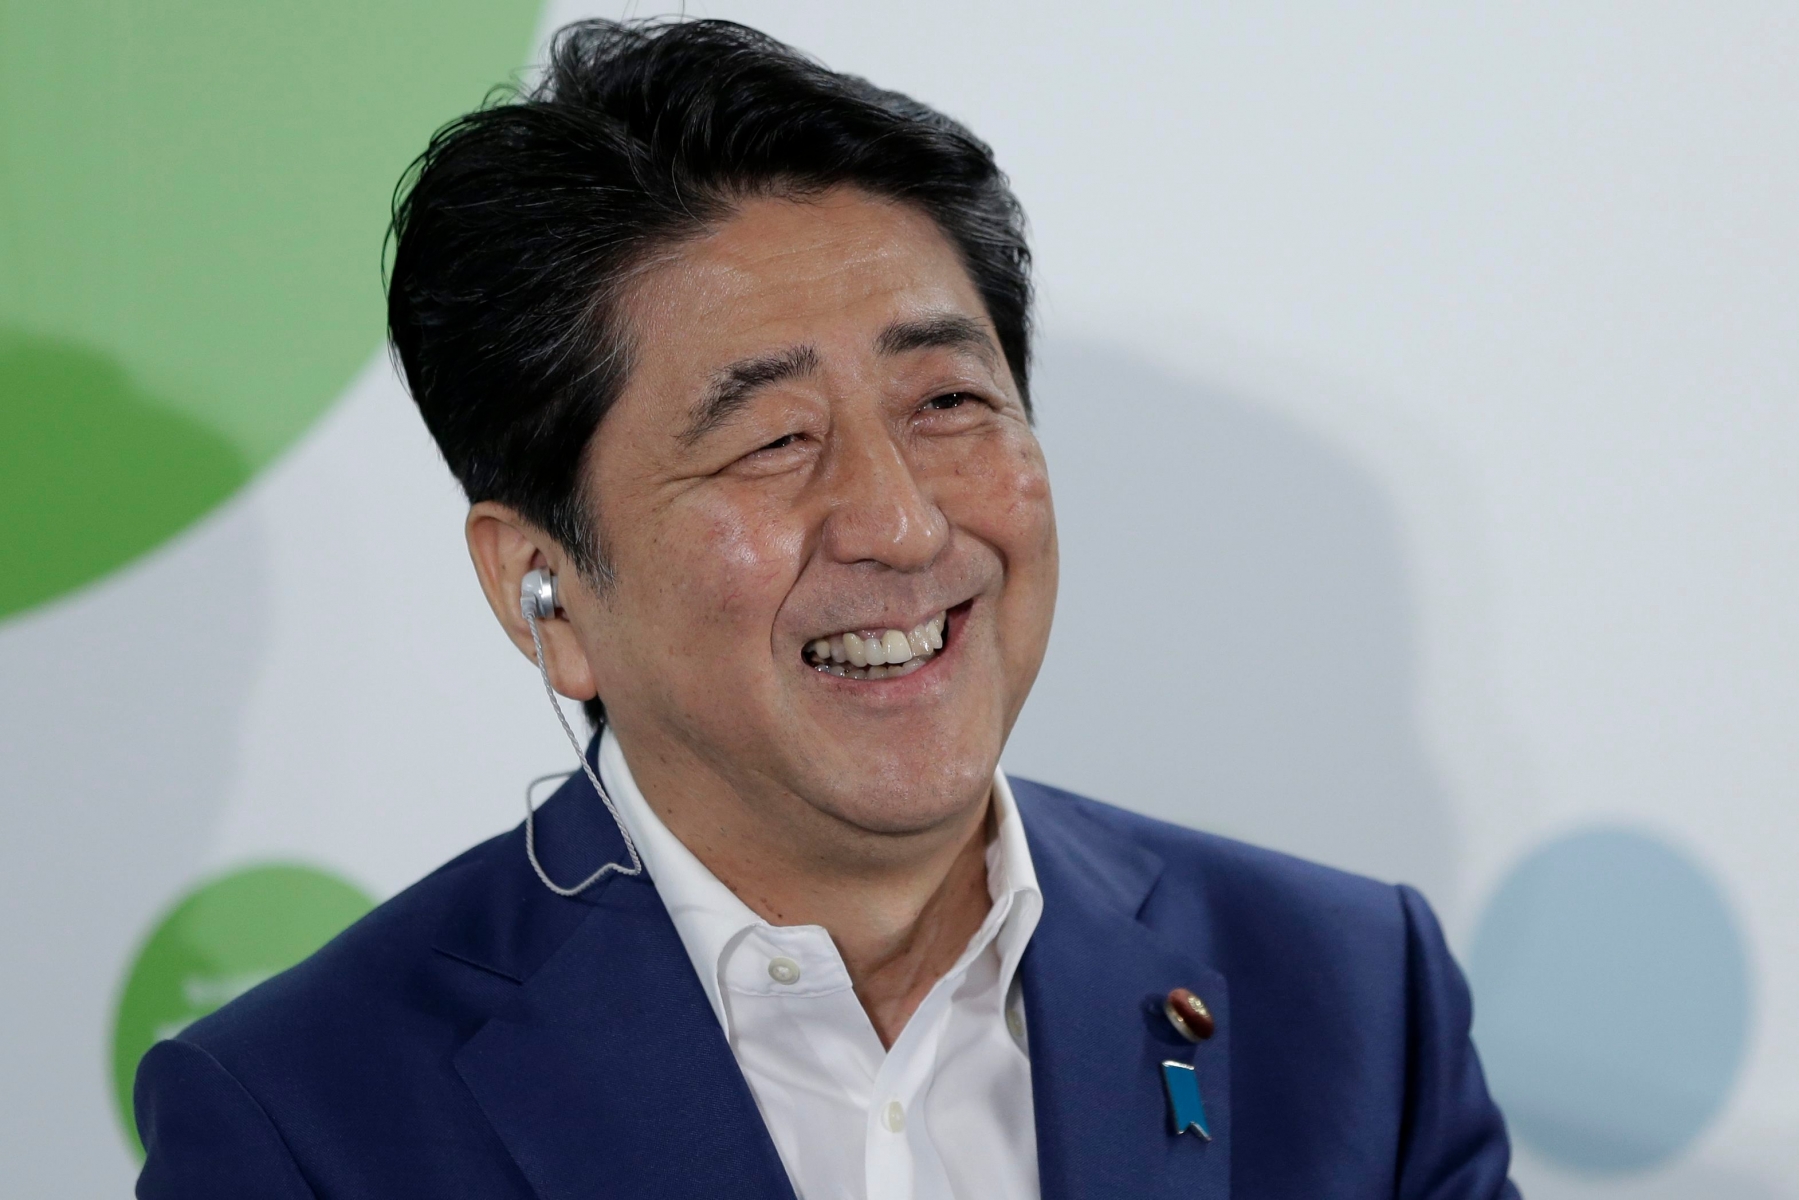 epa05418631 Japanese Prime Minister and the ruling Liberal Democratic Party (LDP) President Shinzo Abe smiles during a media interview after putting red rose marks on the names of the party's victorious candidates in the Upper House election at the LDP headquarters in Tokyo, Japan, 10 July 2016. The Upper House election was held on 10 July, and Abe's Liberal Democratic Party and its coalition partner Komeito won a majority in the election.  EPA/KIYOSHI OTA JAPAN ELECTIONS PARTIES